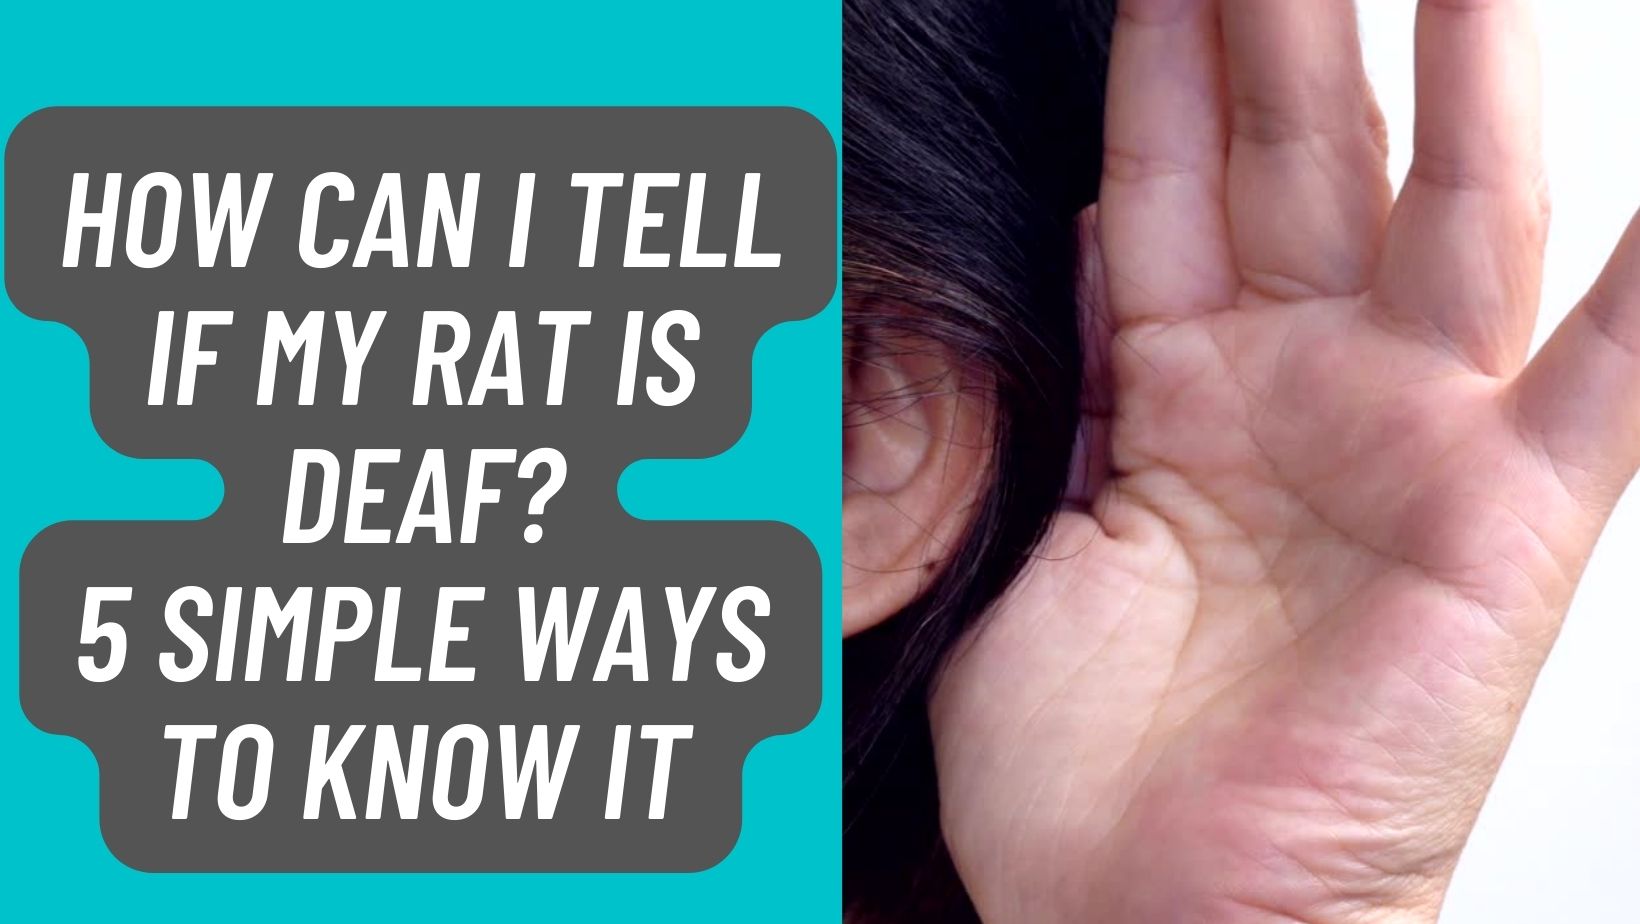 How Can I Tell if My Rat is Deaf? – 6 Ways To Tell